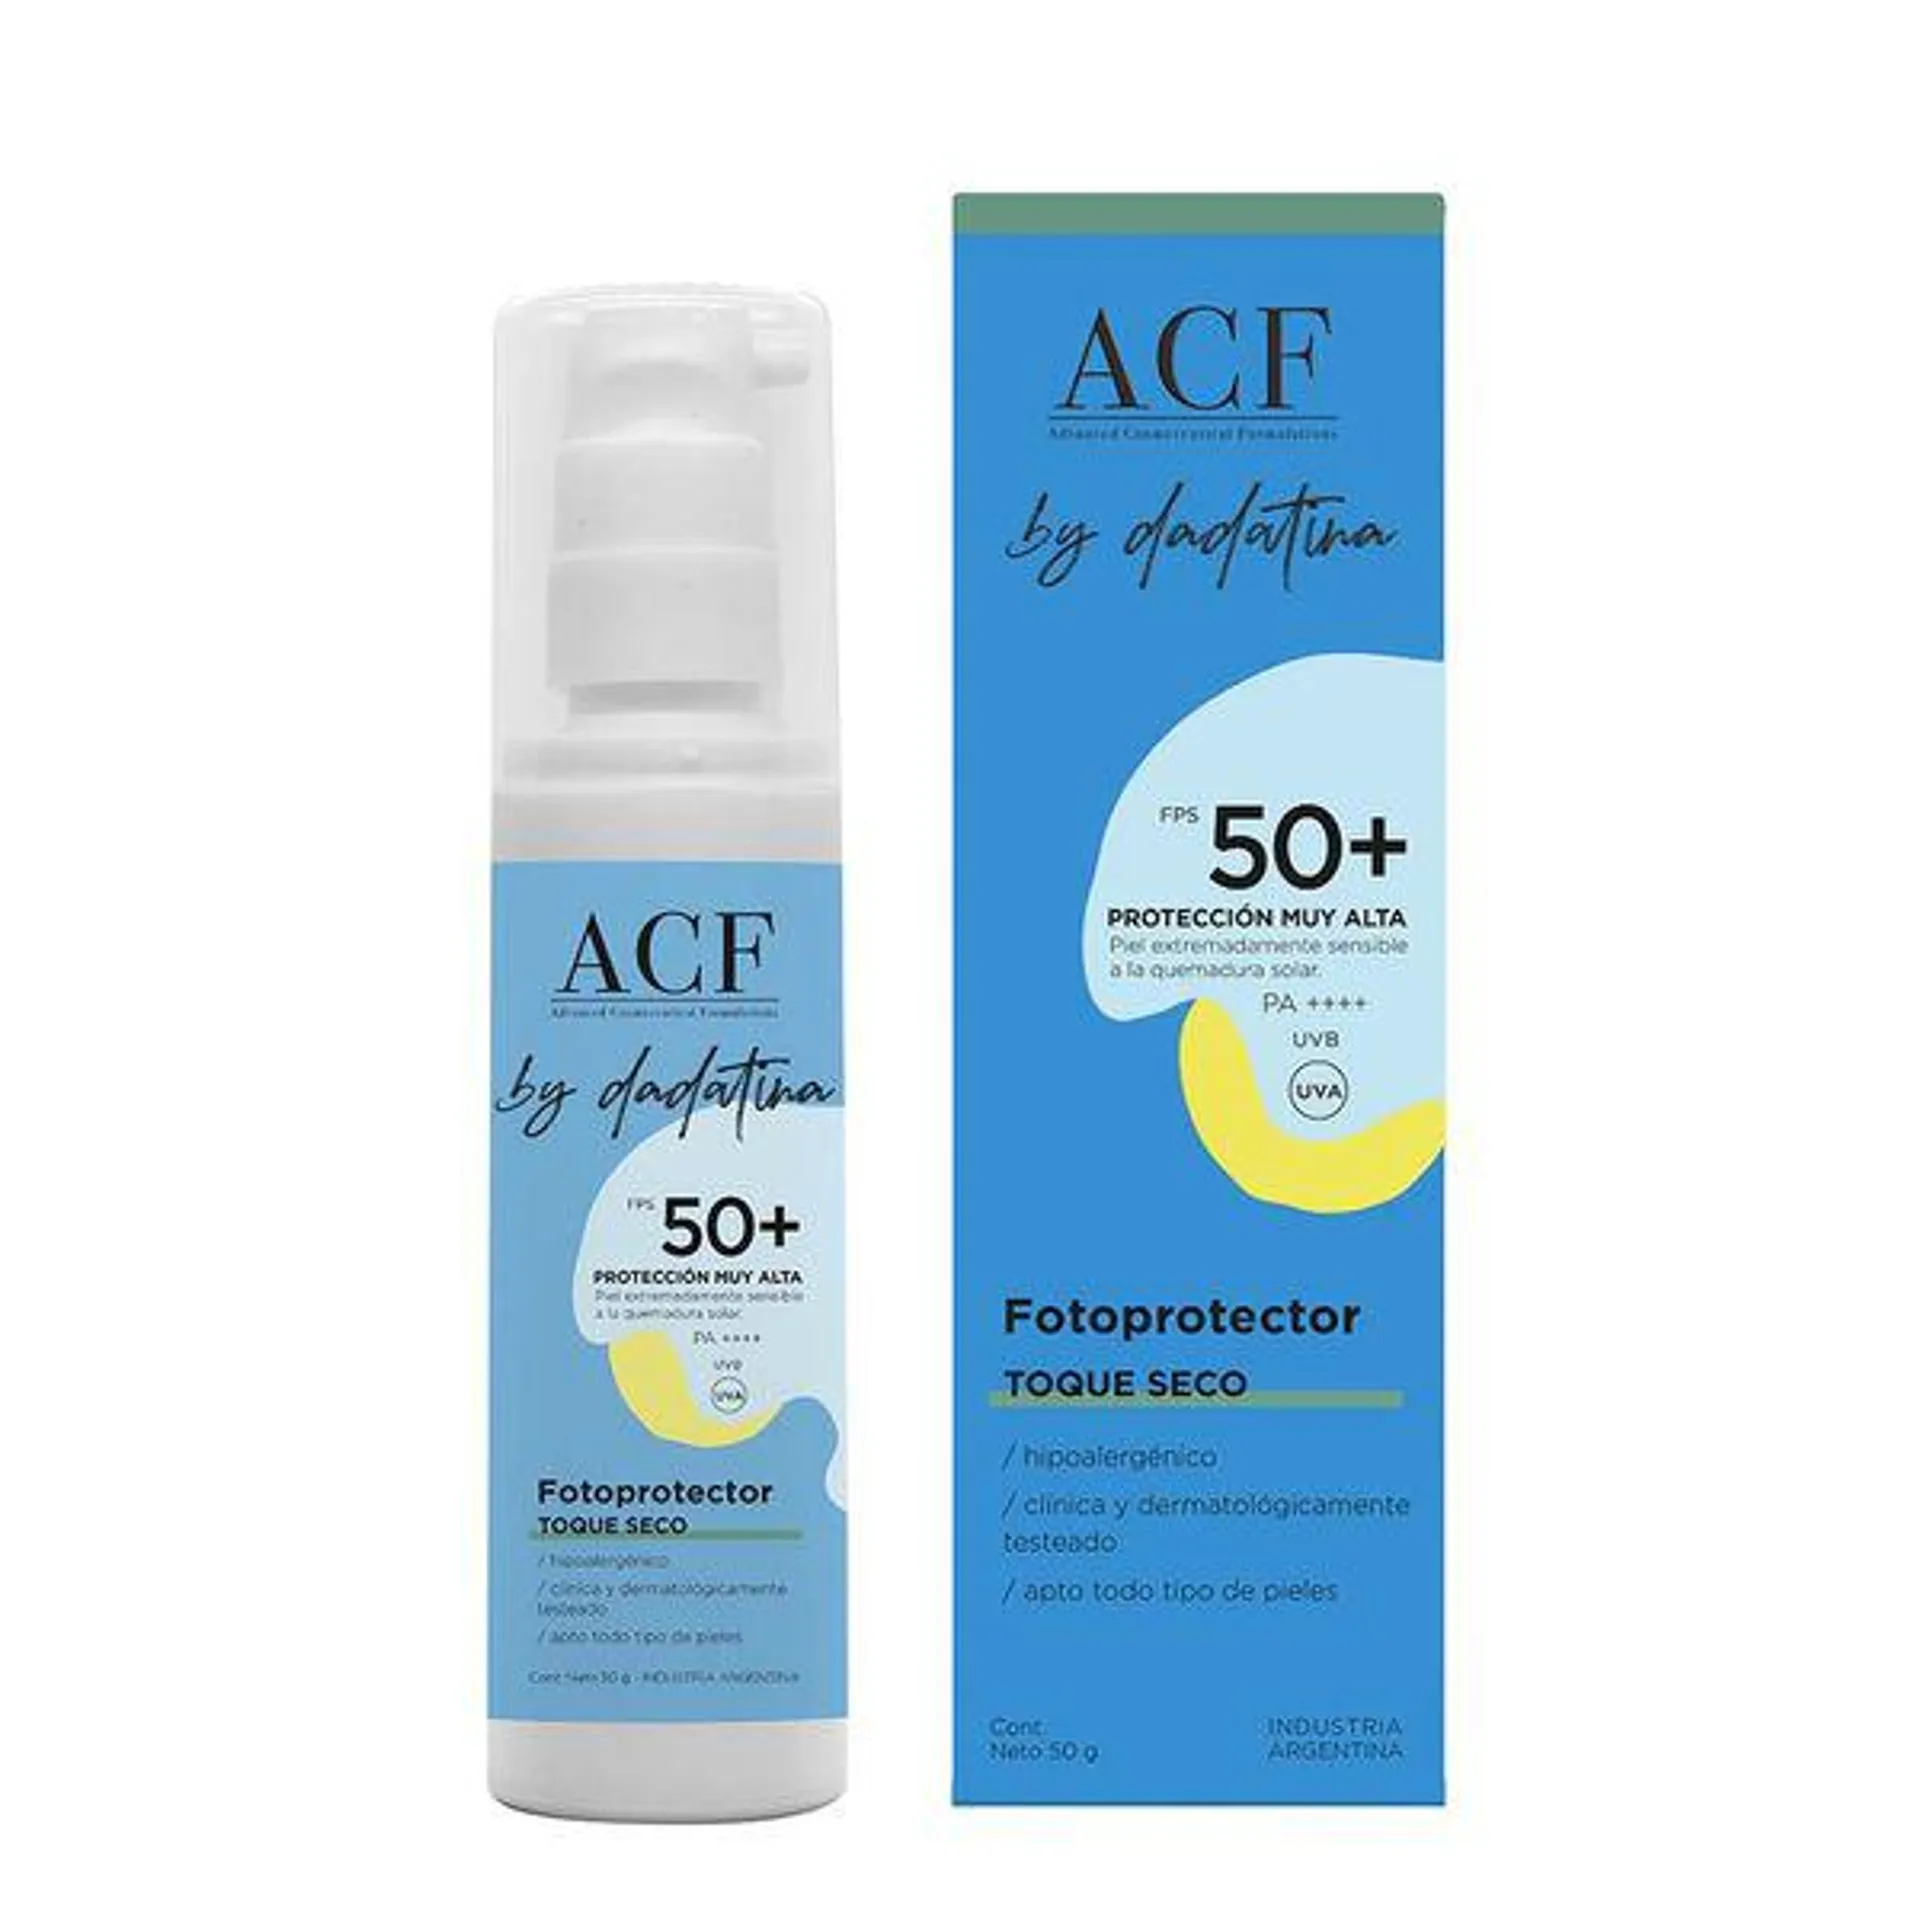 Fotoprotector Acf by Dadatina Toque Seco Fps 50 x 50 g